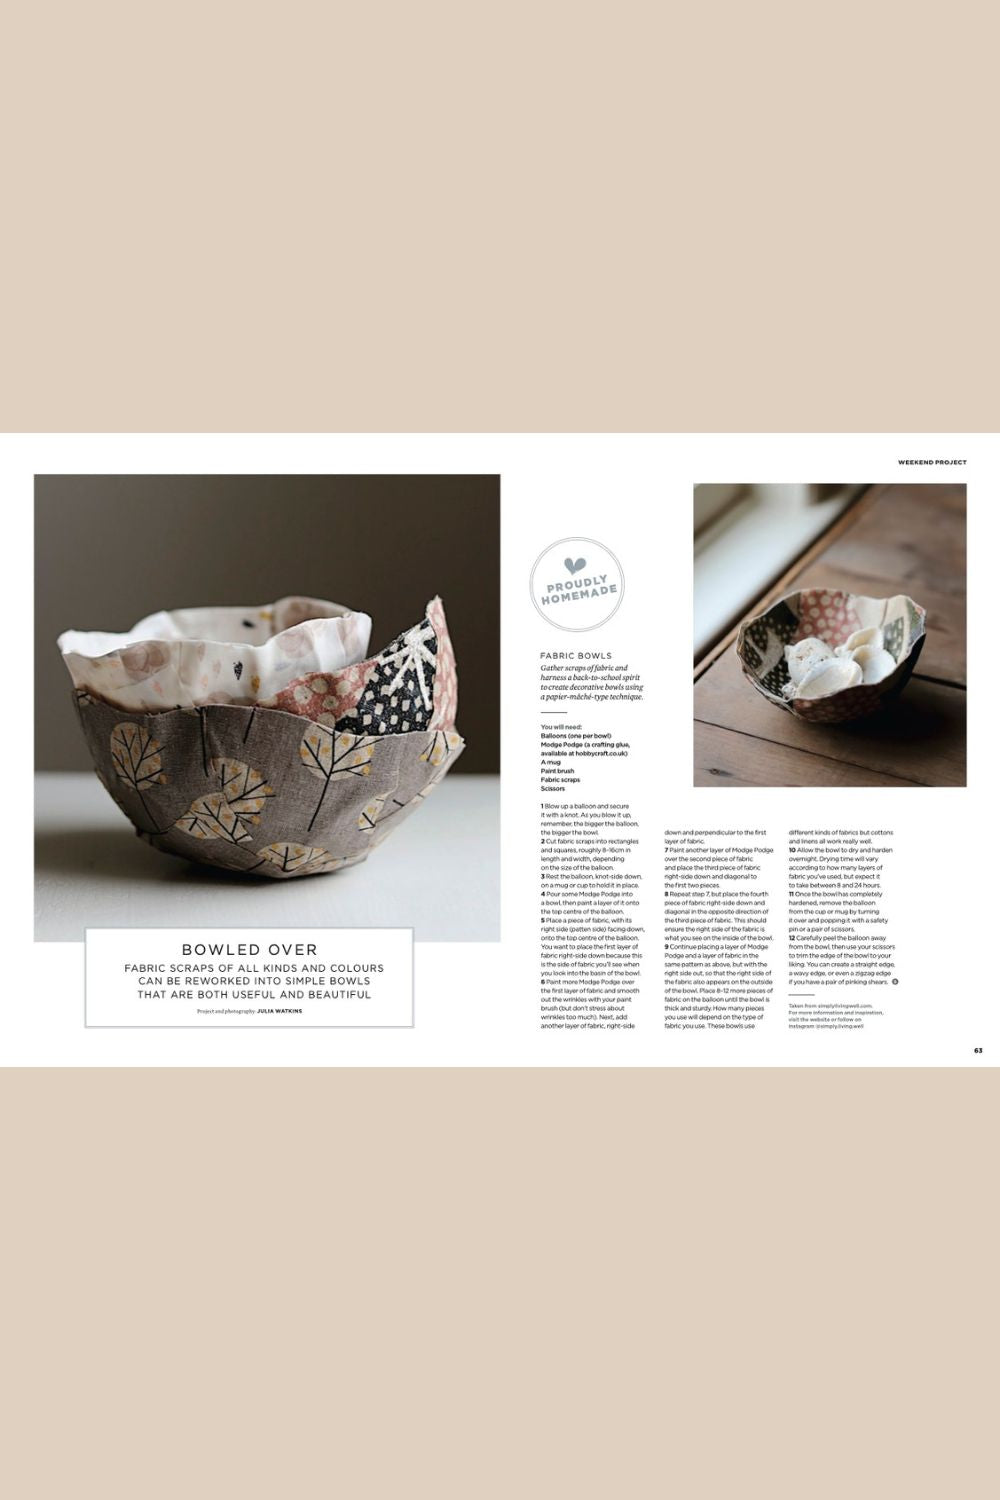 The Simple Things Issue 130 April